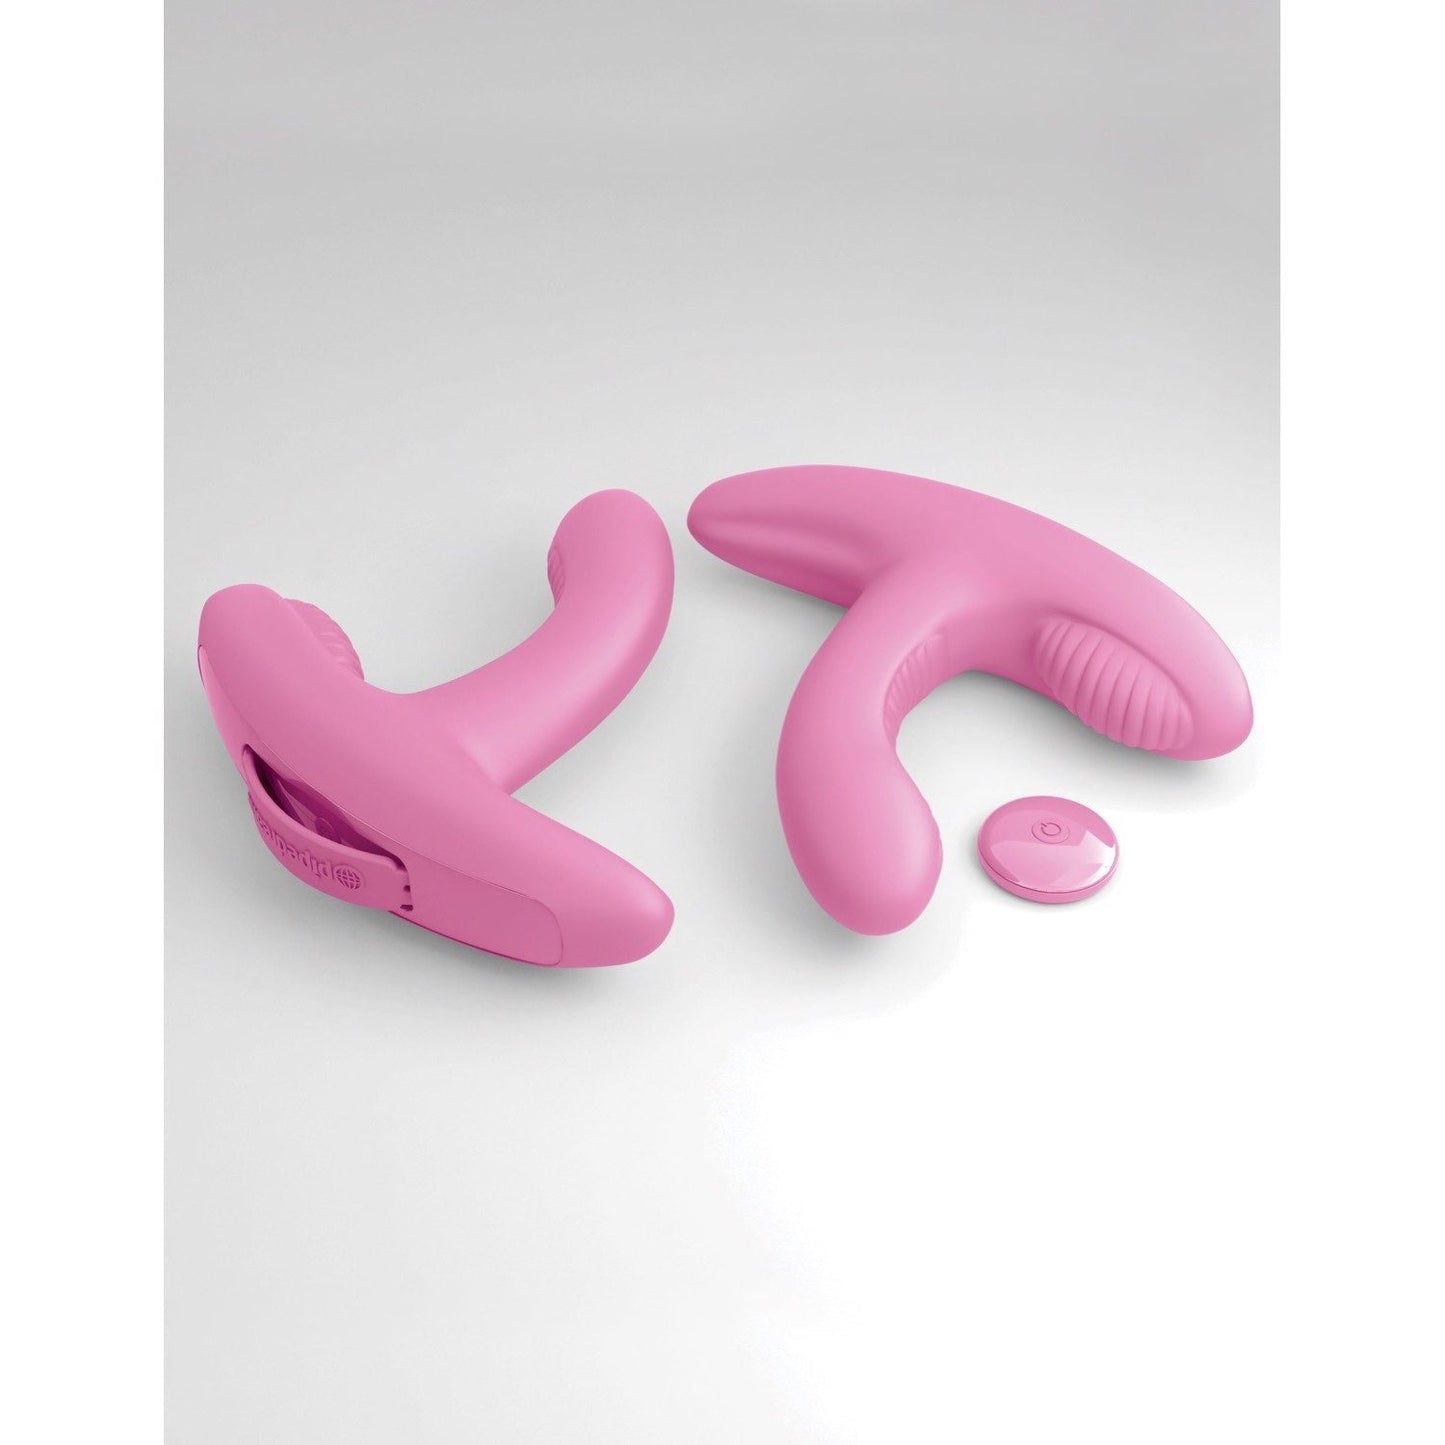 Rock N Grind - Pink USB Rechargeable Stimulator with Wireless Remote